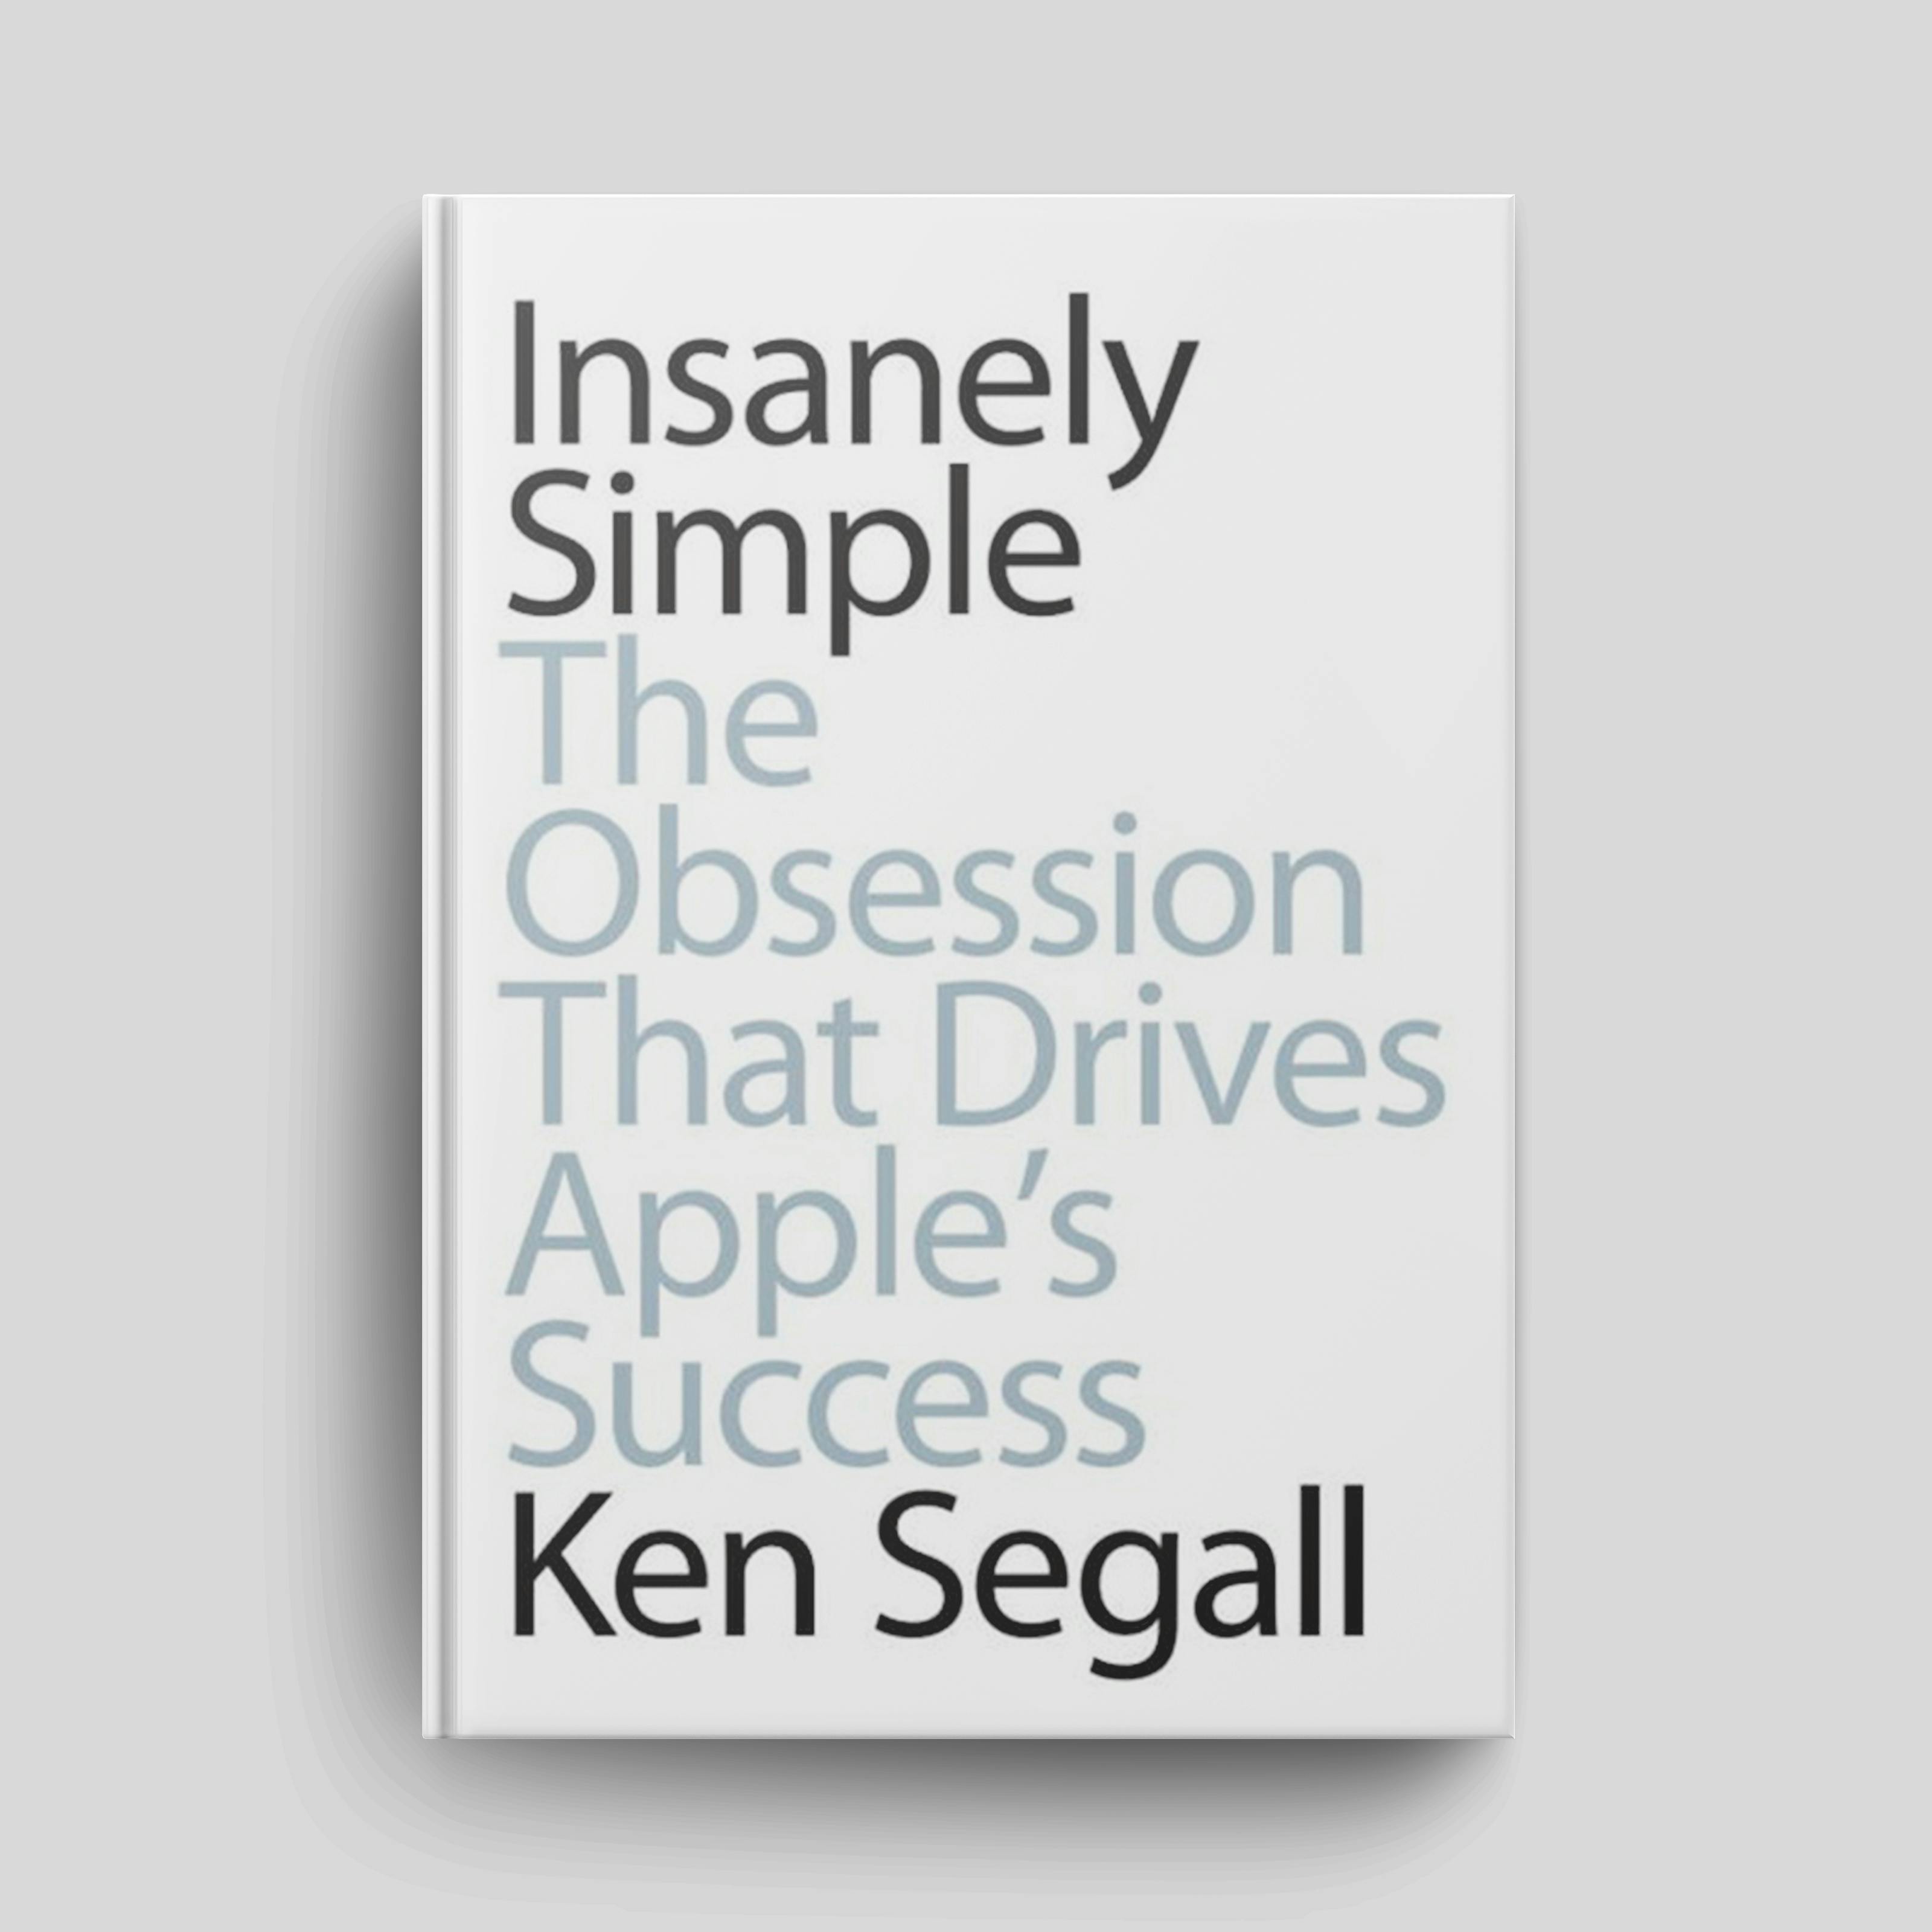 Trailer - Book: (Part 2) ”Insanely Simple: The Obsession That Drives Apple’s Success” | Episode #175 (Part 2 of 2)